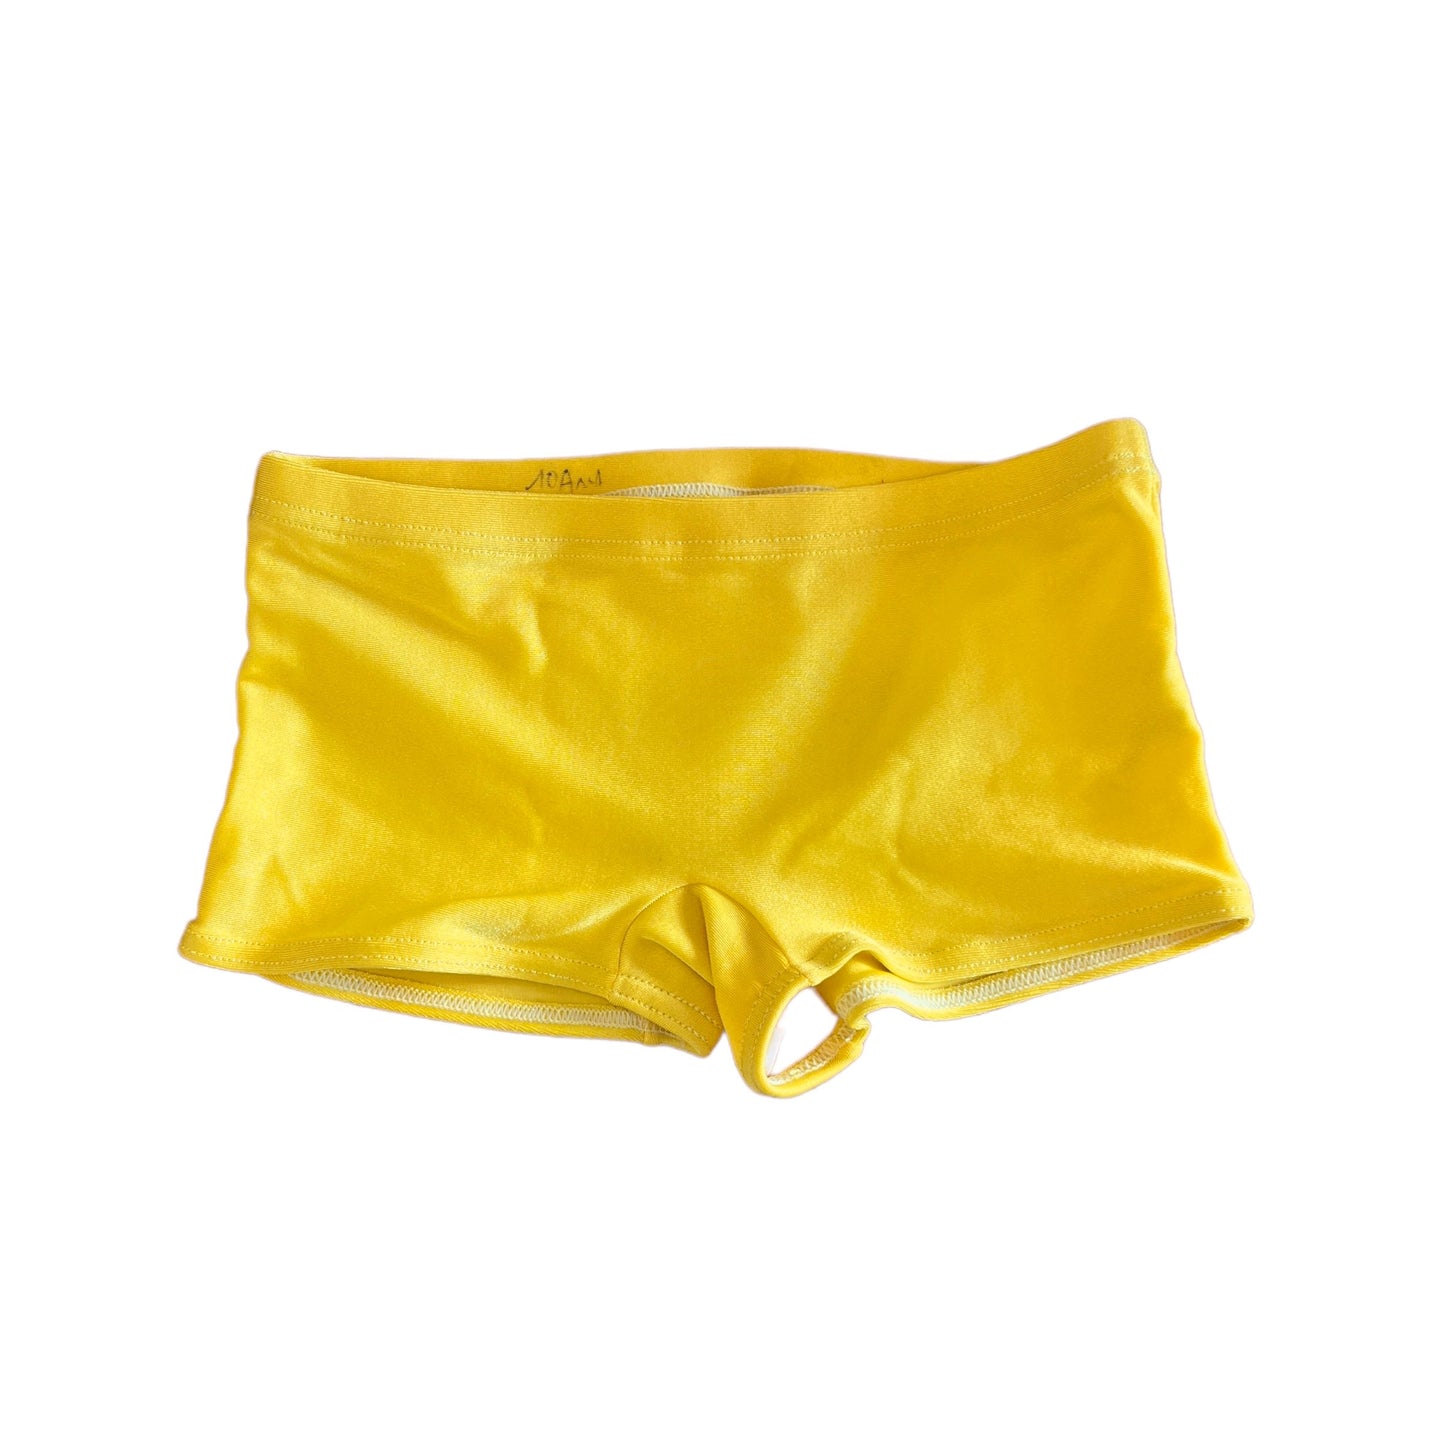 Vintage 70's Yellow Swimming Trunks / Shorts 5-6Y